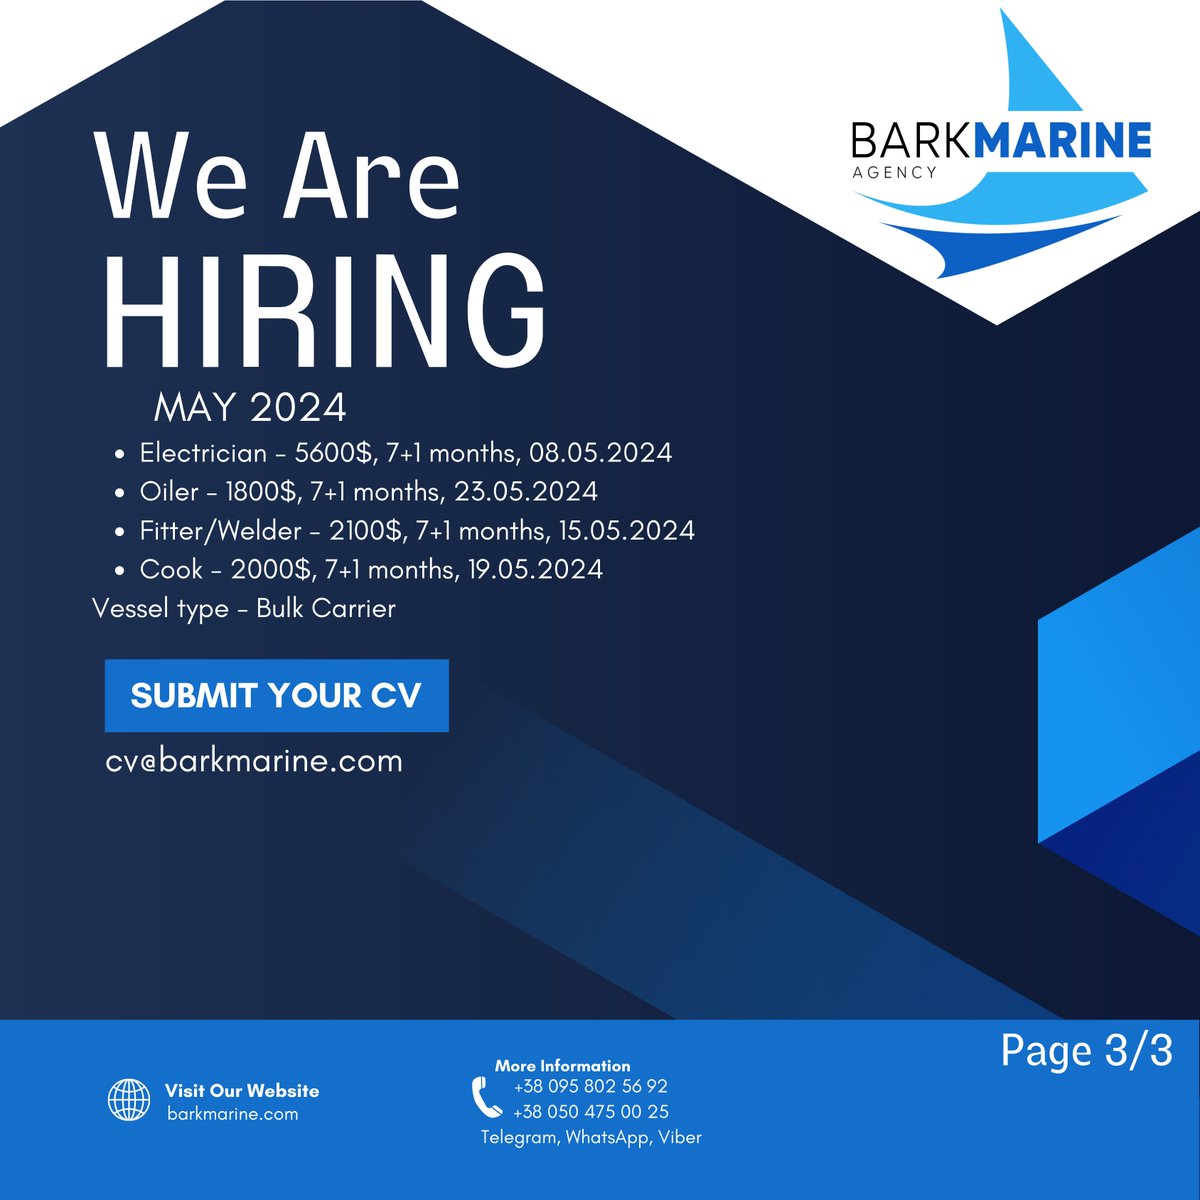 Ahoy there! We are on the lookout for experienced seafarers to join our ranks for April and May 2024. Submit your CV to cv@barkmarine.com
#JobAtSea #CareerAtSea #JoinOurCrew #MaritimeJobs #Maritime #HumanResources #Hiring #SeafarerCareers #WorkAtSea #HumanResources #Crewing